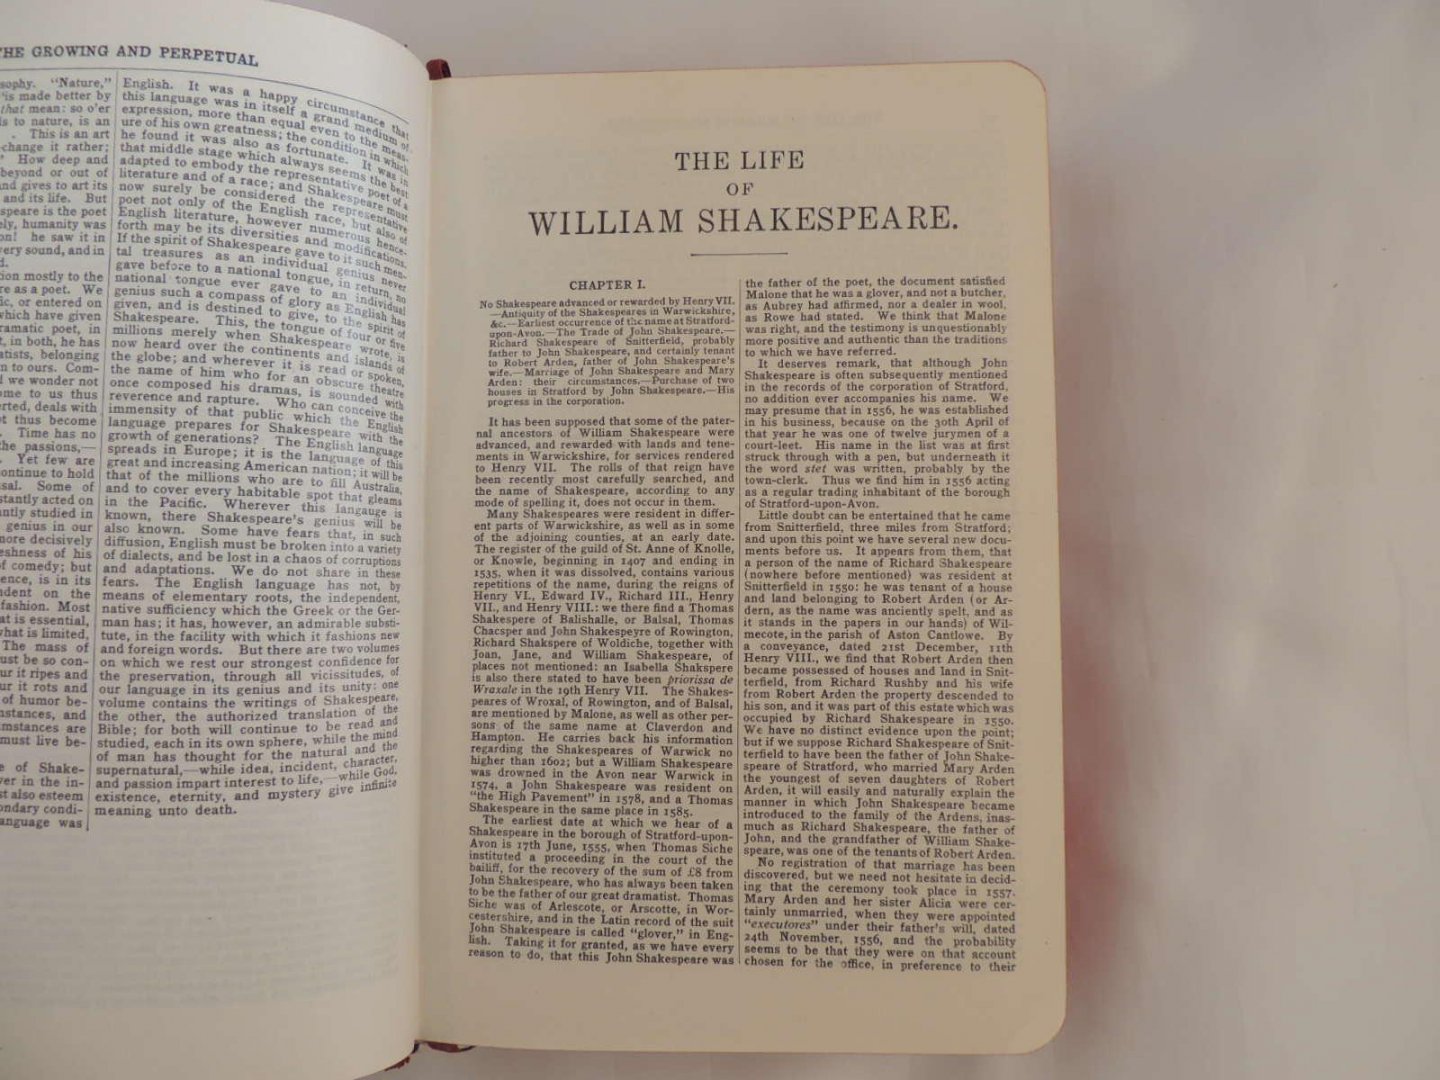 William Shakespeare; Alexander Anderson; T M Matterson - The complete works of William Shakespeare comprising his plays and poems : also the history of life, his will and an introduction to each play. to which is added ,an index to the characters.